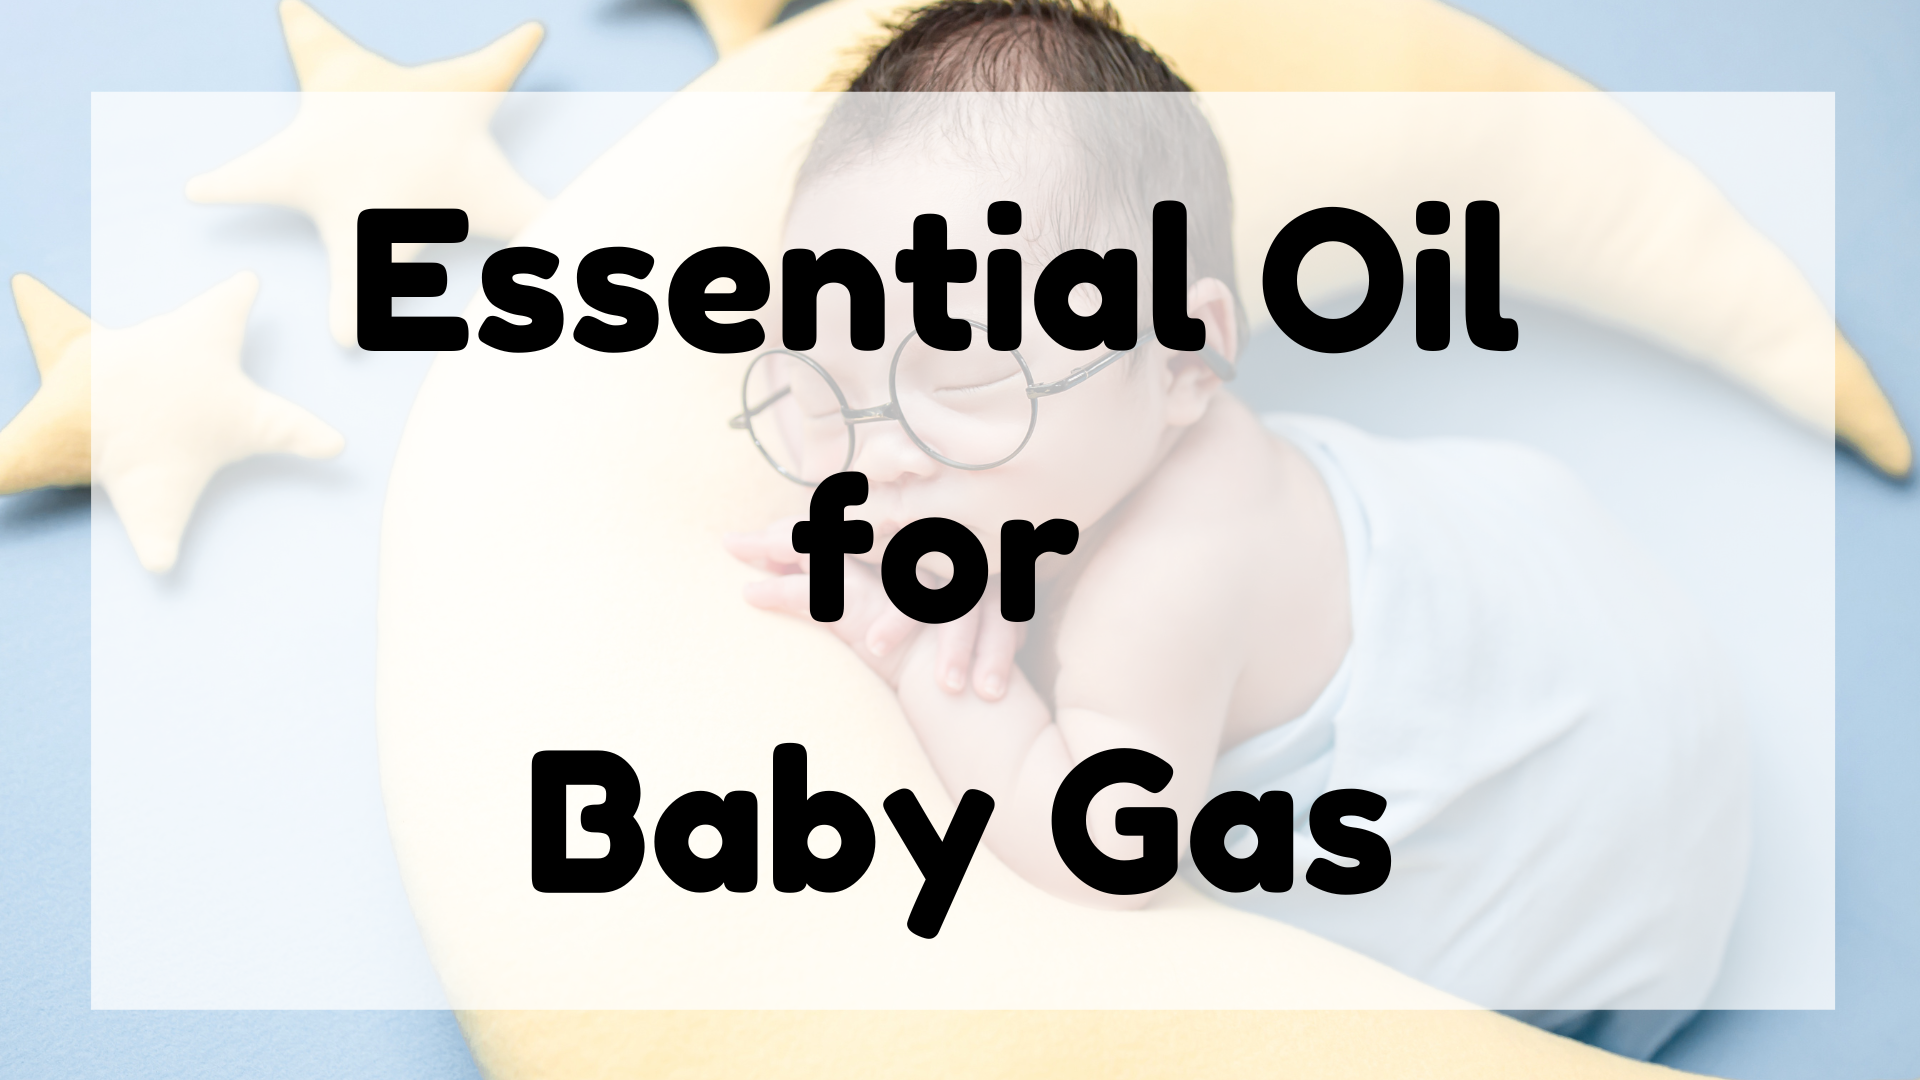 Essential Oil for Baby Gas featured image